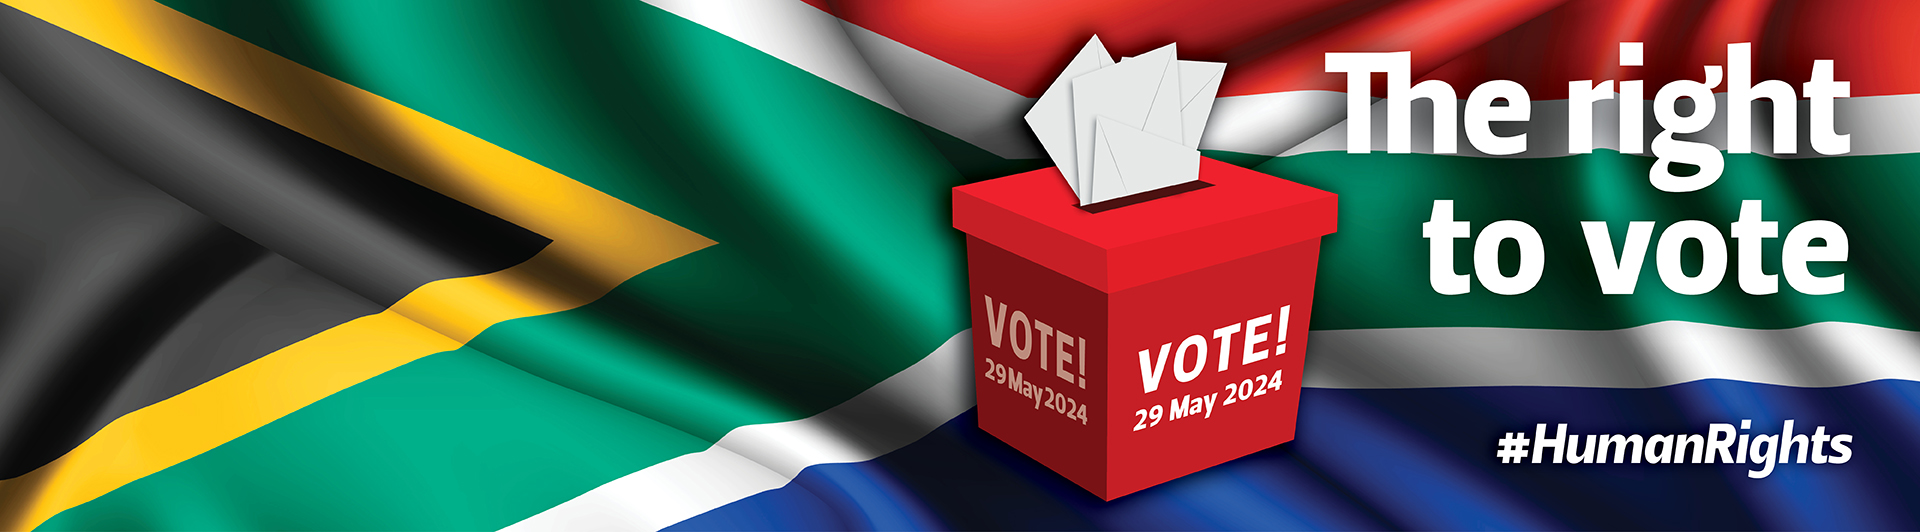 The Right to Vote - 2024 SA Elections